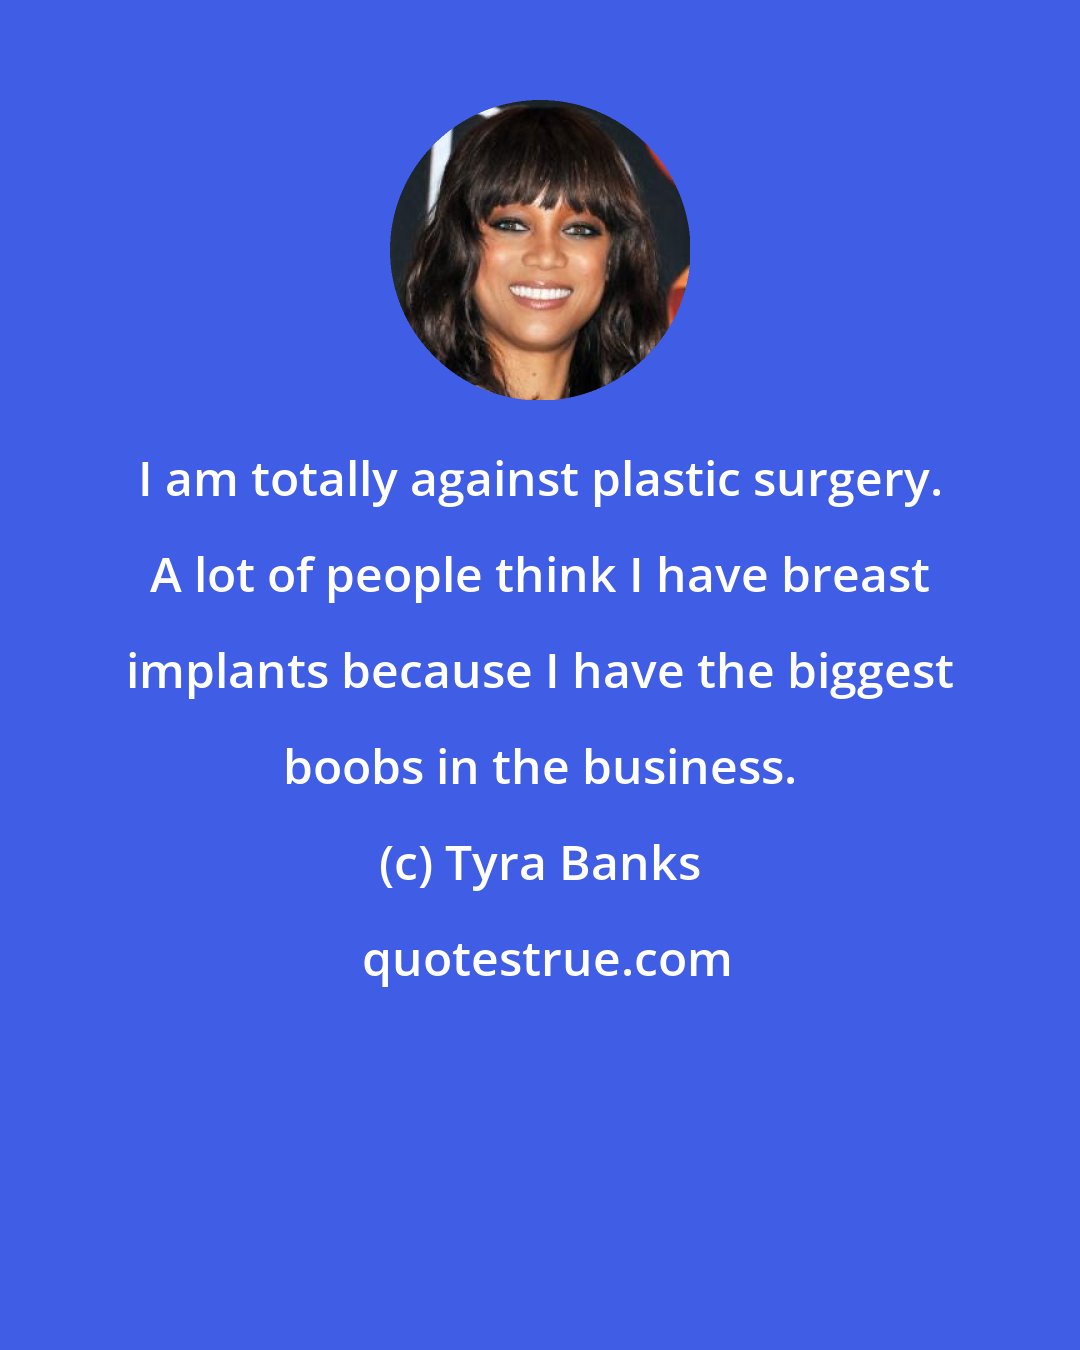 Tyra Banks: I am totally against plastic surgery. A lot of people think I have breast implants because I have the biggest boobs in the business.